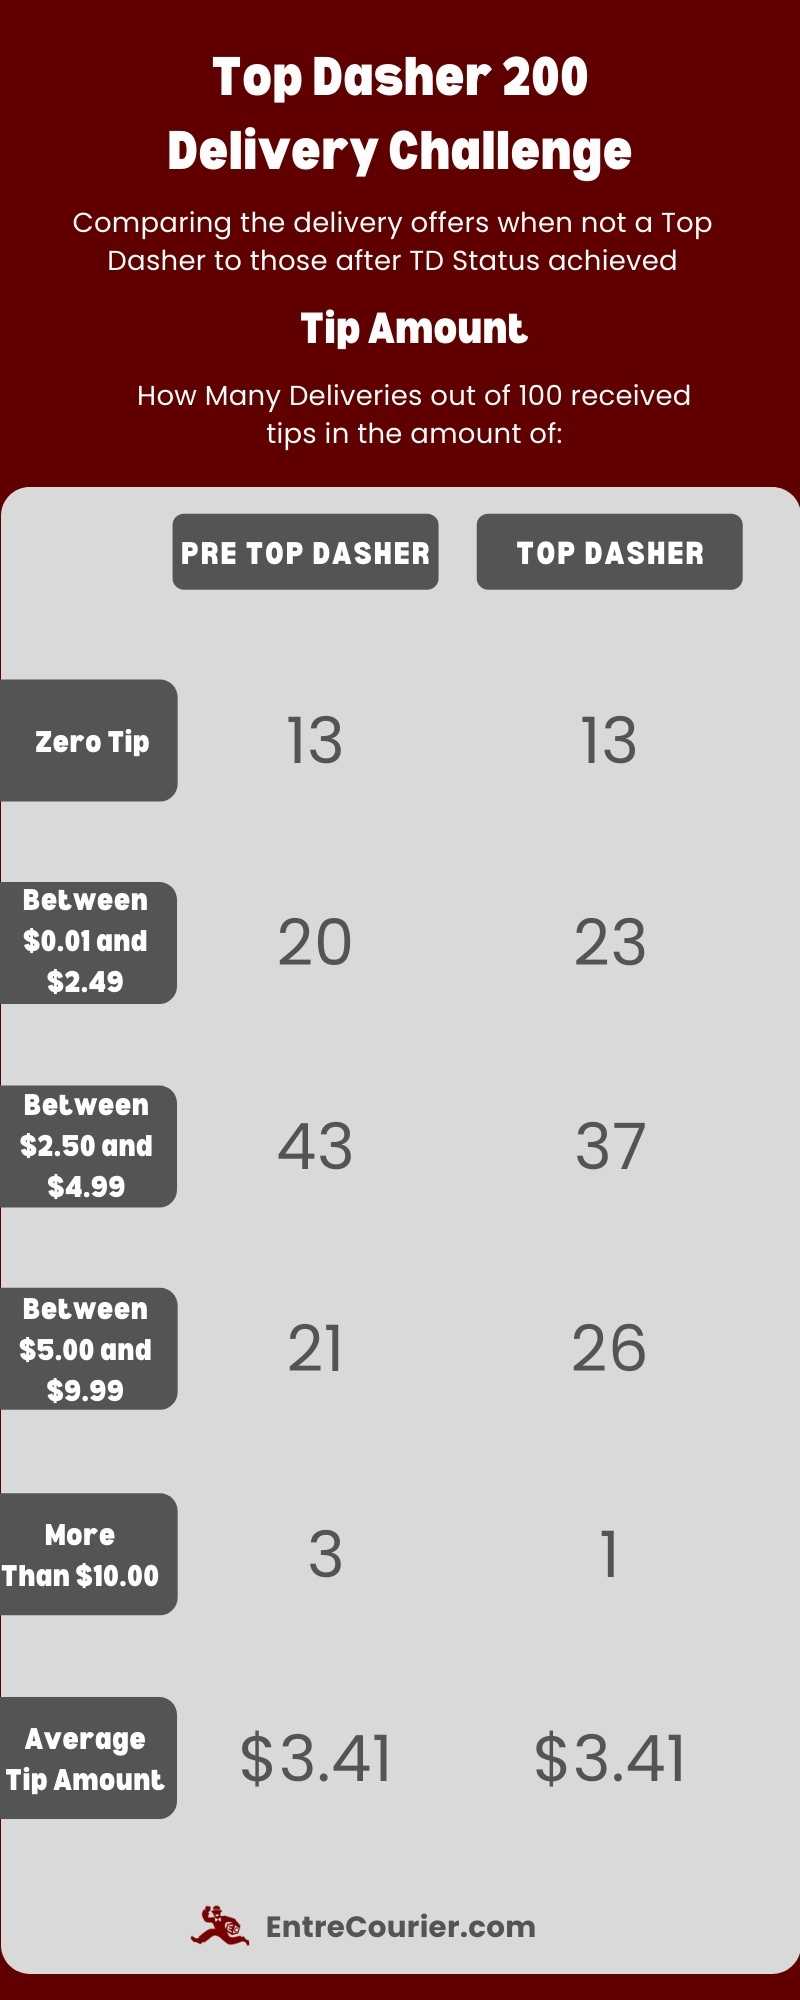 Infographic comparing tips received as a Top Dasher compared to a non-top Dasher. 